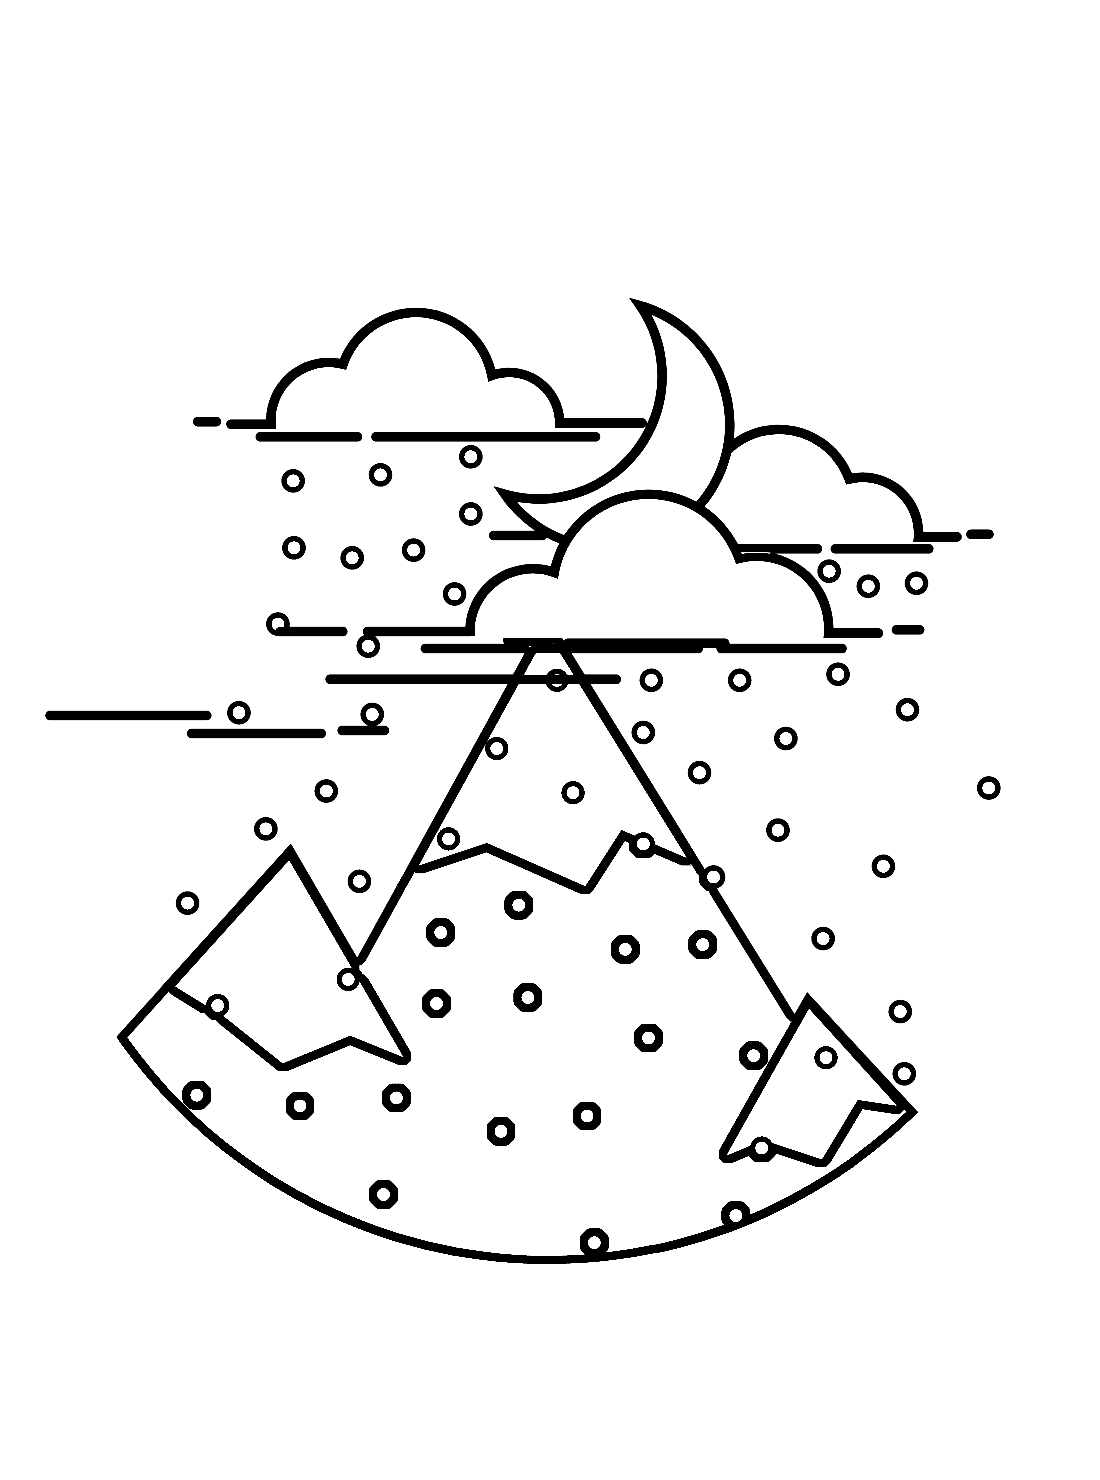 Friday night funkin coloring pages sky